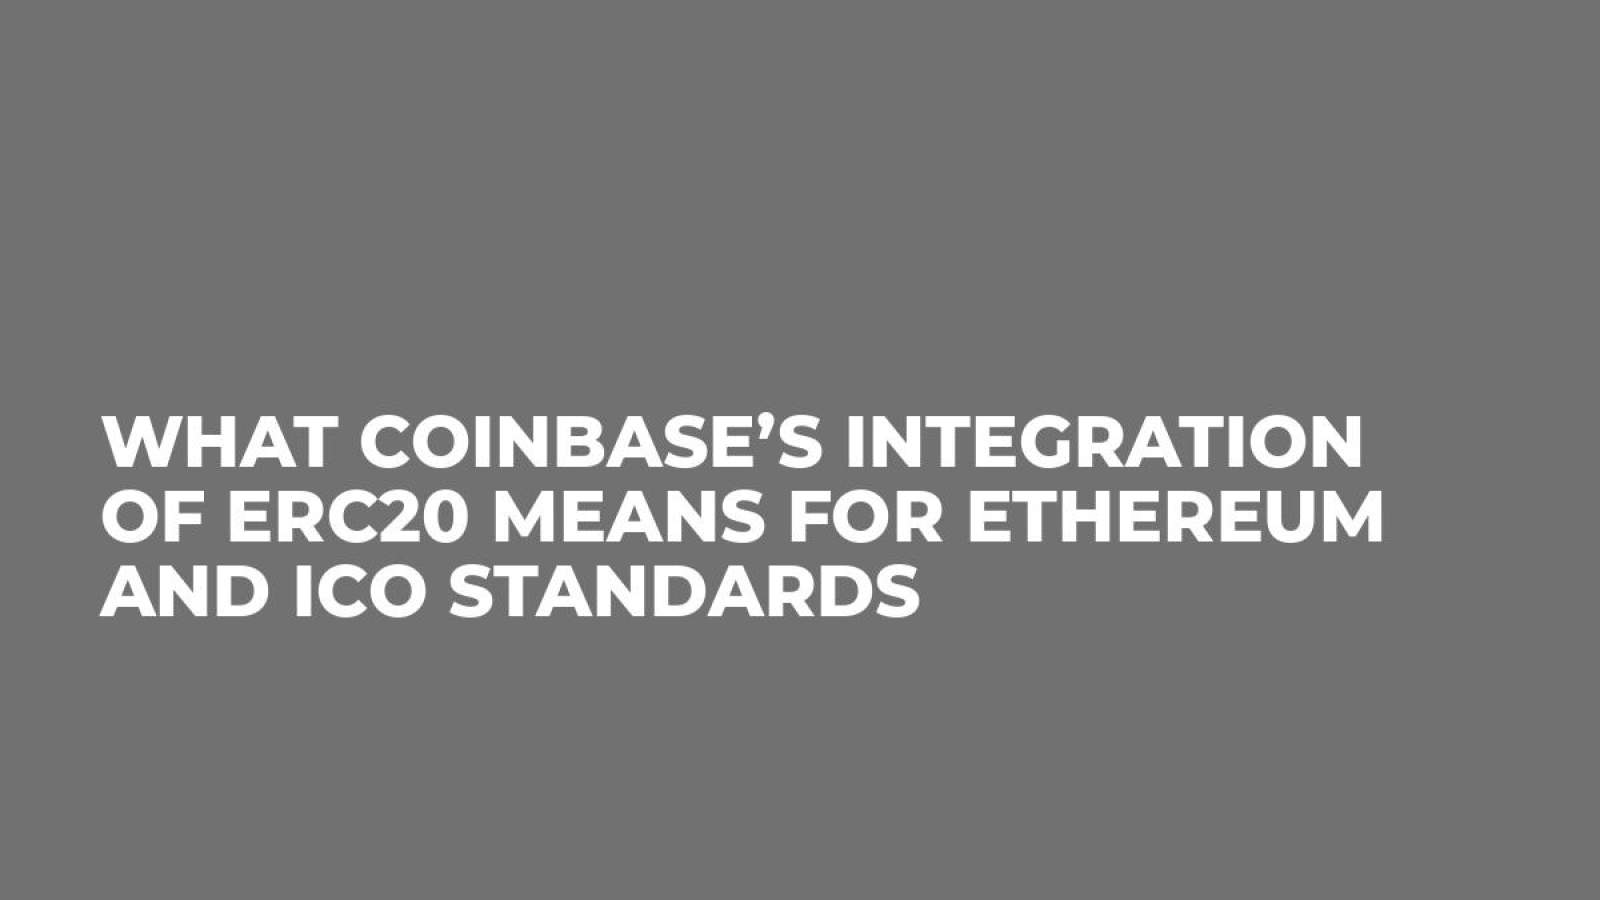 What Coinbase’s Integration of ERC20 Means For Ethereum and ICO Standards